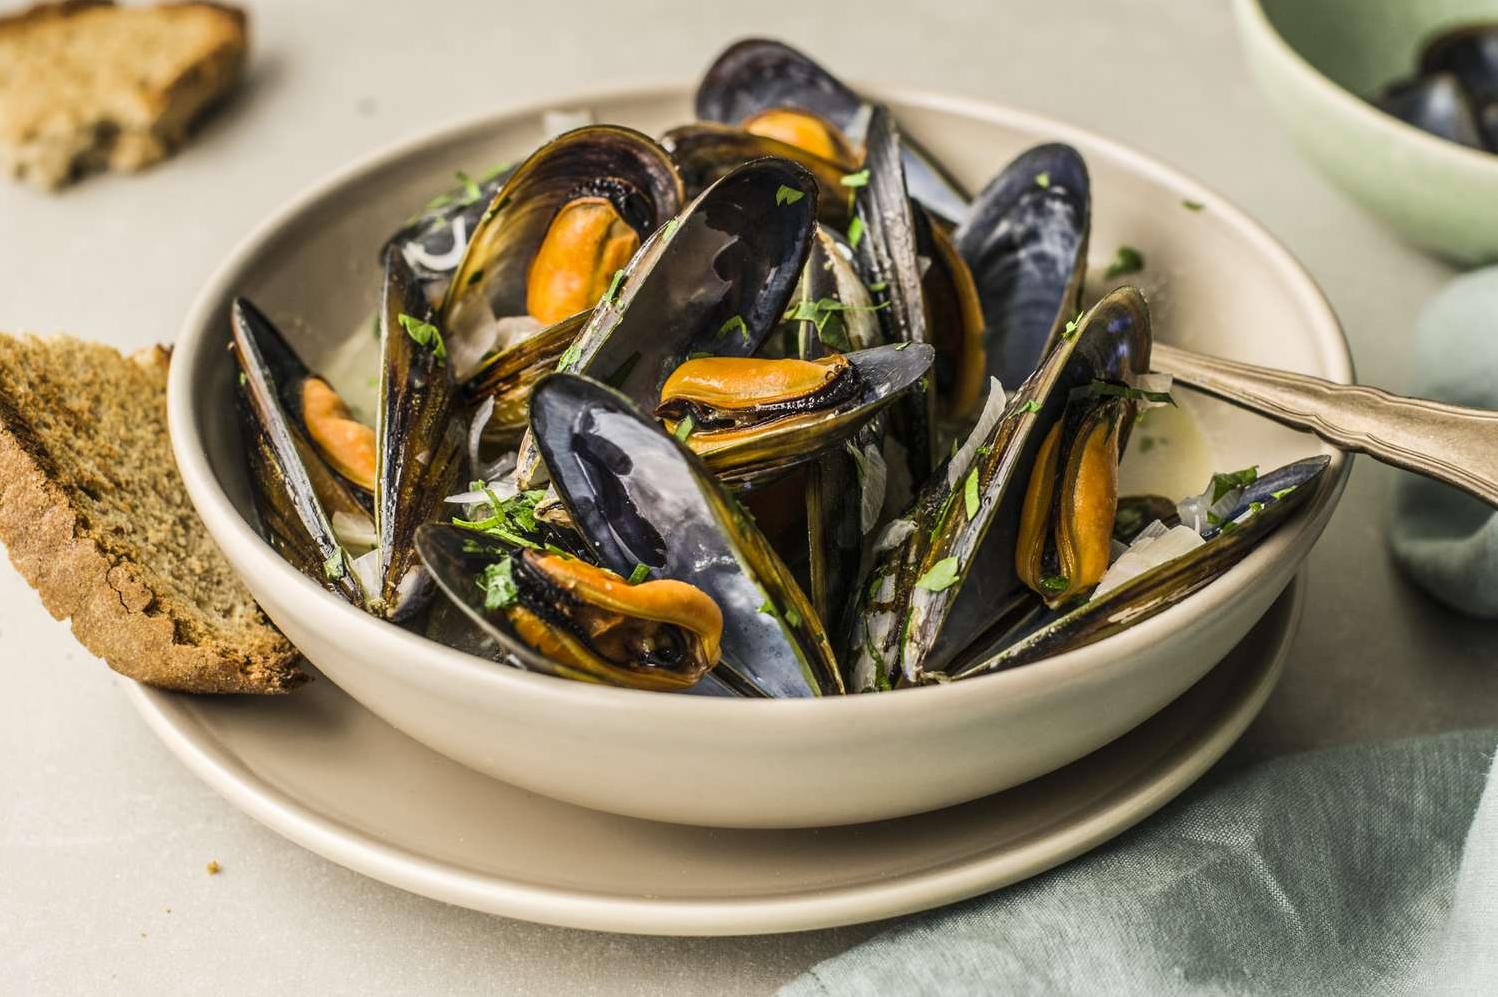  Dive into a bowl of succulent mussels in white wine sauce!